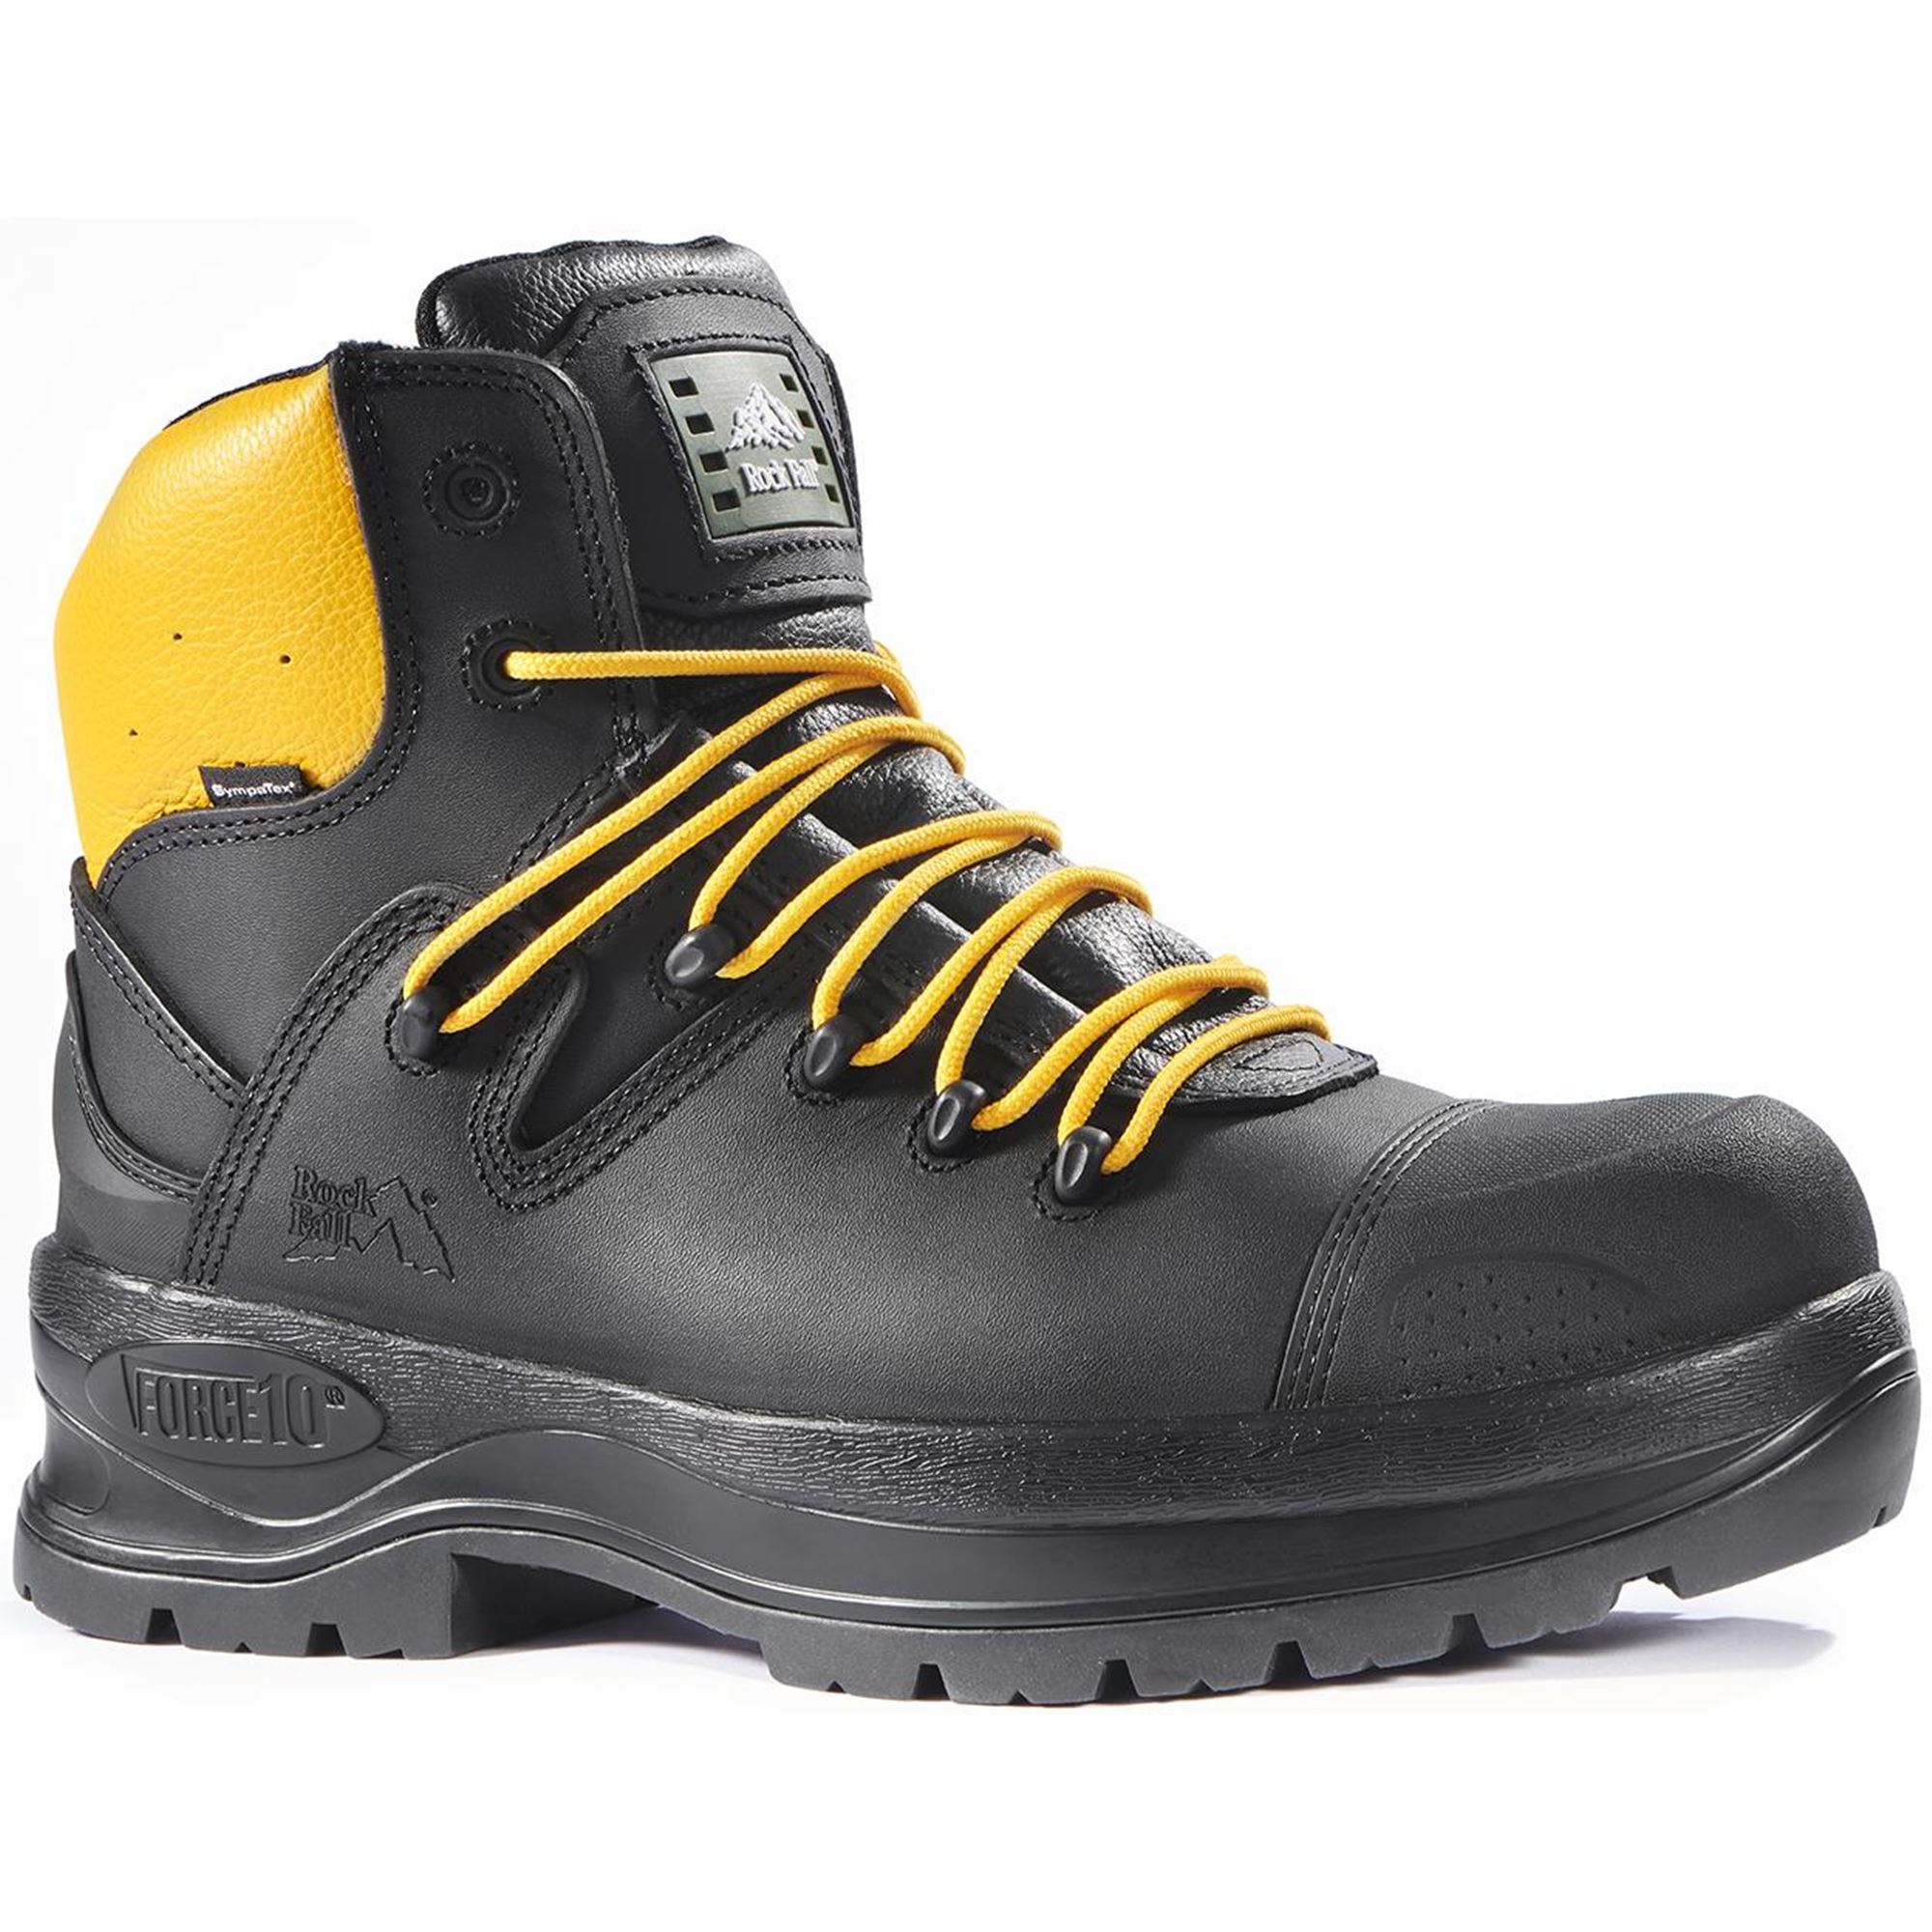 Rock Fall Power RF900 Electrical Hazard Safety Boots